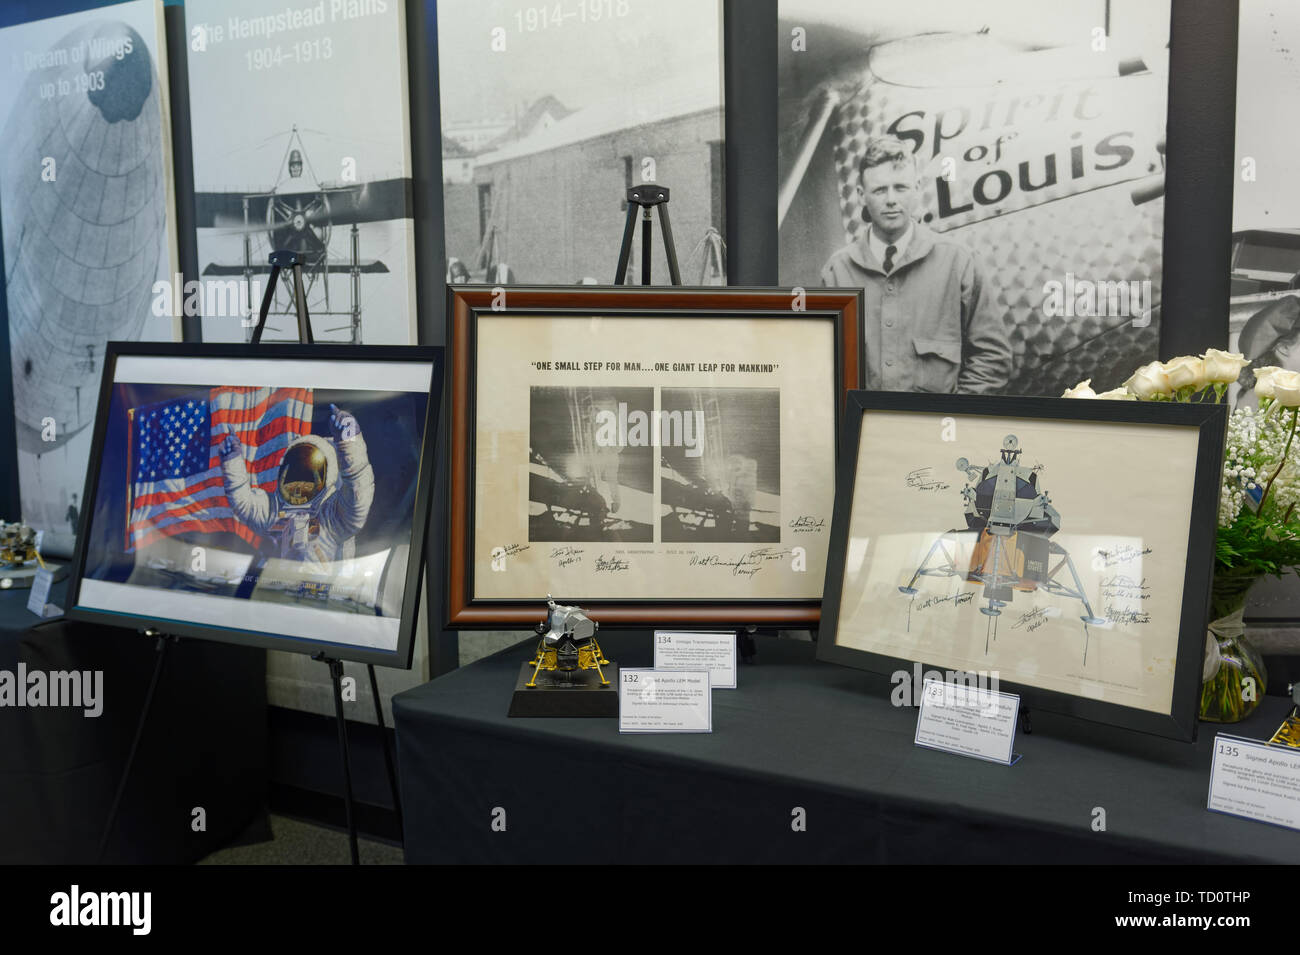 Garden City, New York, USA. 6th June, 2019. Three Apollo space memorabilia items, L-R, signed print by astronaut artist Alan Bean, a vintage transmission print, and a vintage lithograph of lunar module, are on display at Silent Auction fundraiser area at Cradle of Aviation Museum, during Apollo at 50 Anniversary Dinner, an Apollo astronaut tribute celebrating the Apollo 11 mission Moon landing. Credit: Ann Parry/ZUMA Wire/Alamy Live News Stock Photo